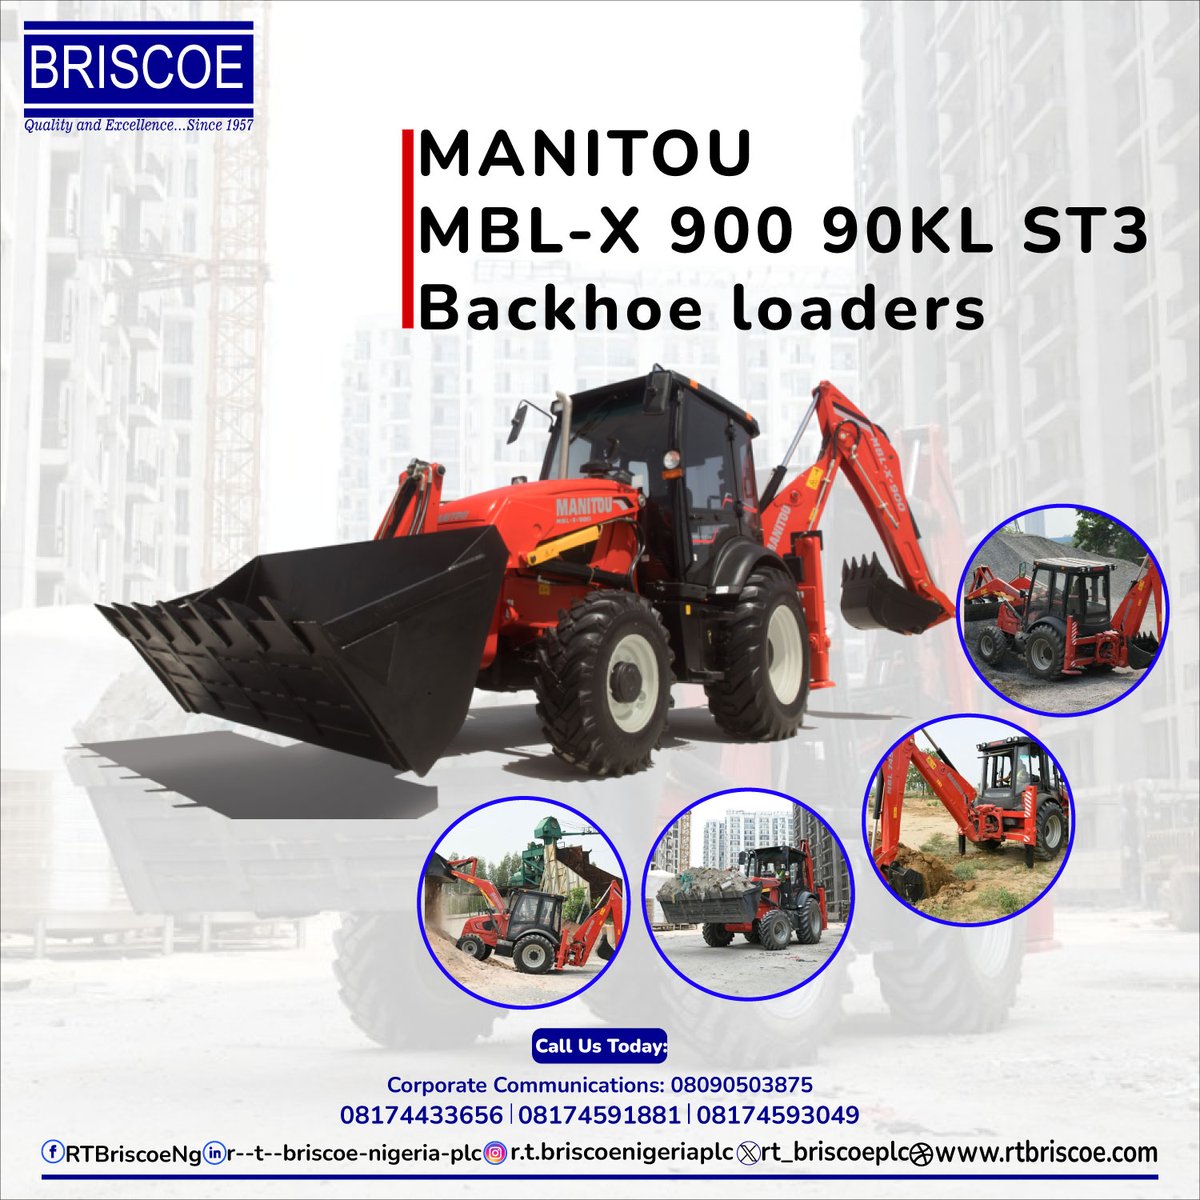 Manitou is setting a new standard in backhoe loaders, and Briscoe Material Handling Equipment is your exclusive gateway to experience this innovation. 

#manitou #manitoumachines #backhoeloader #construction #multipurpose #briscoemhe #rtbriscoenigeriaplc #wednesdayproduct